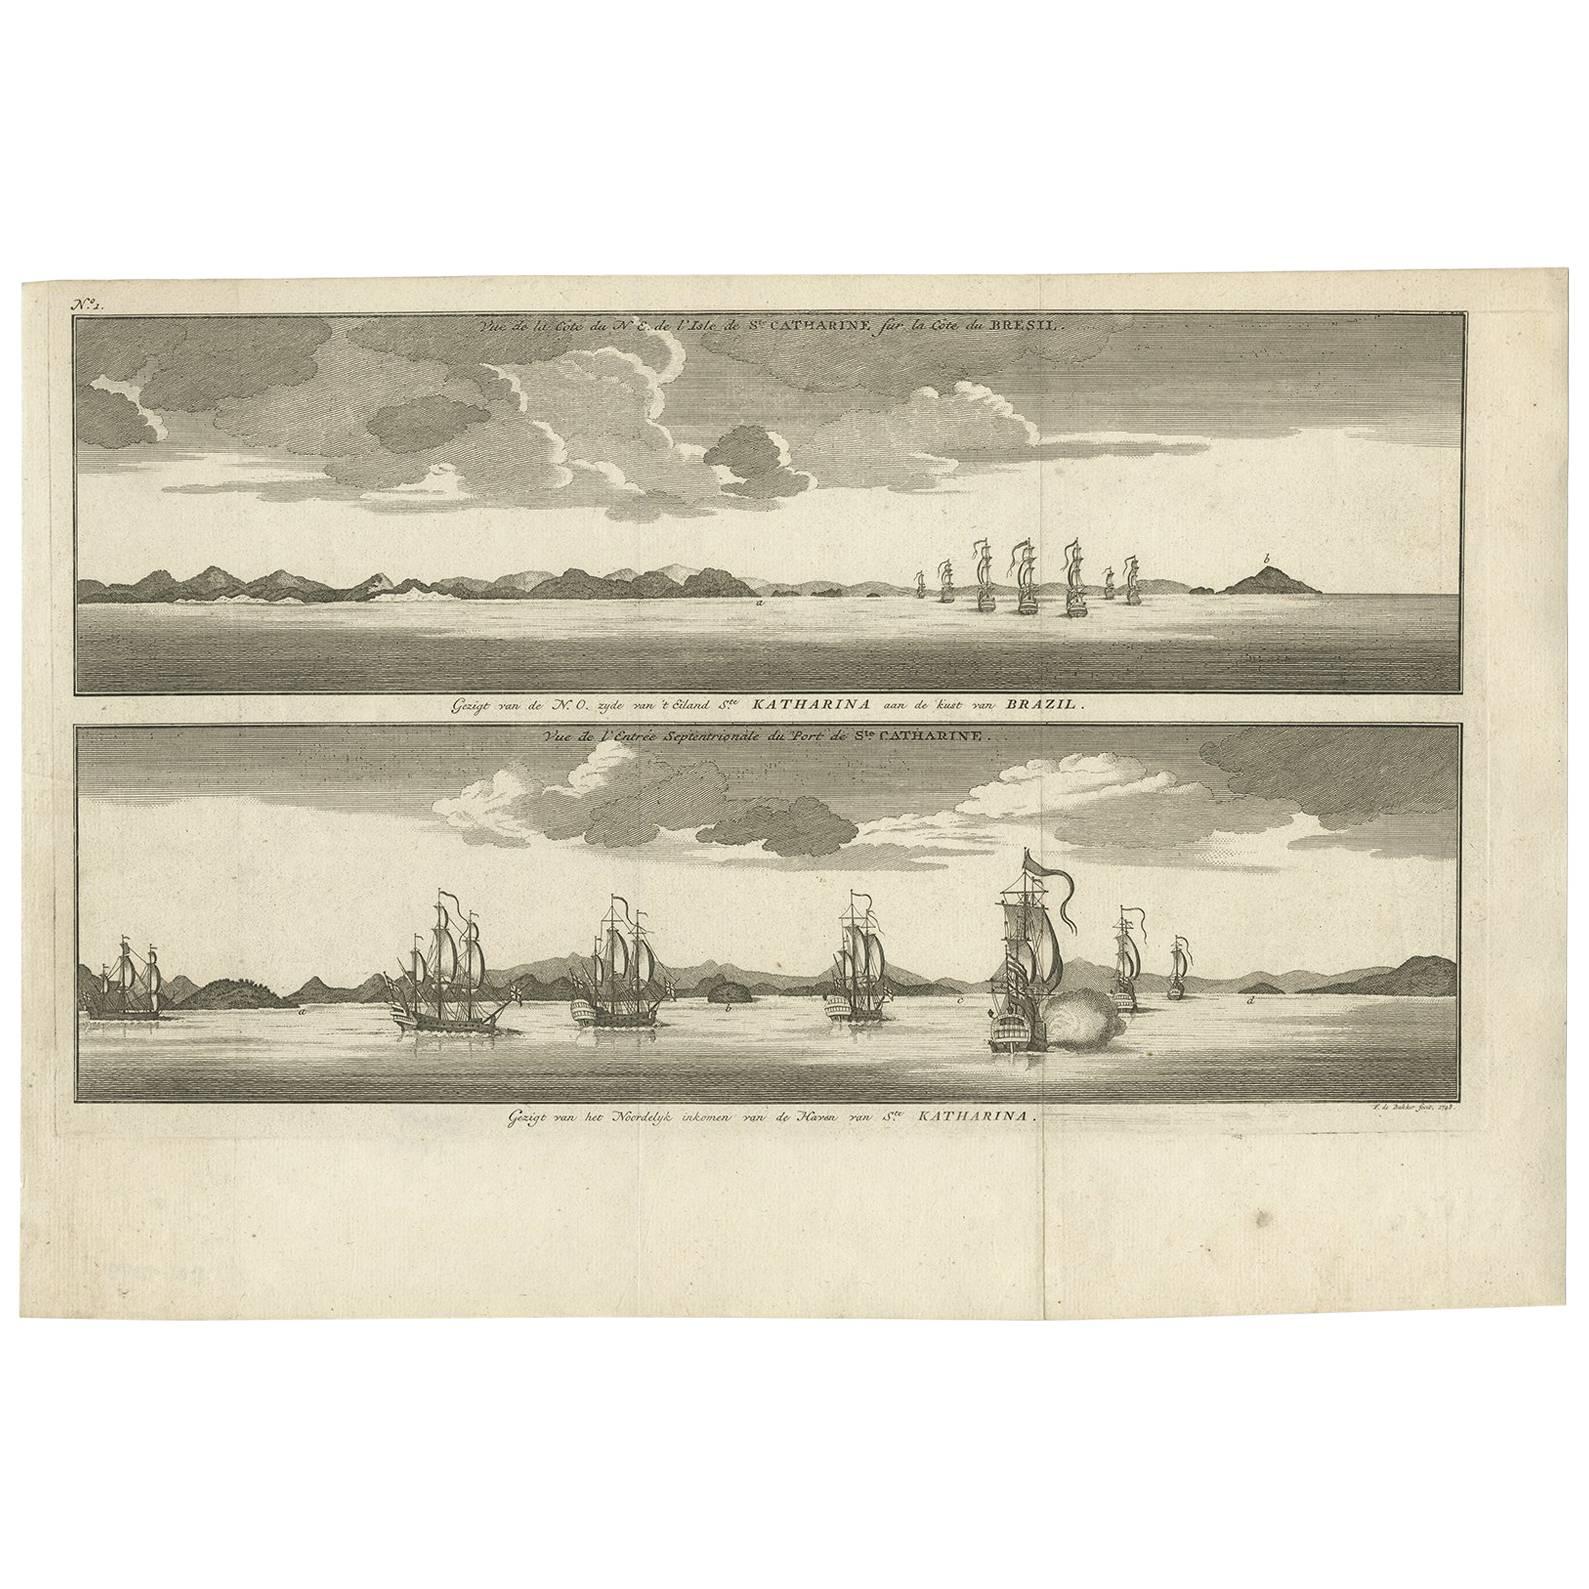 Antique Print with views of Santa Catarina Island by Anson (c.1760)